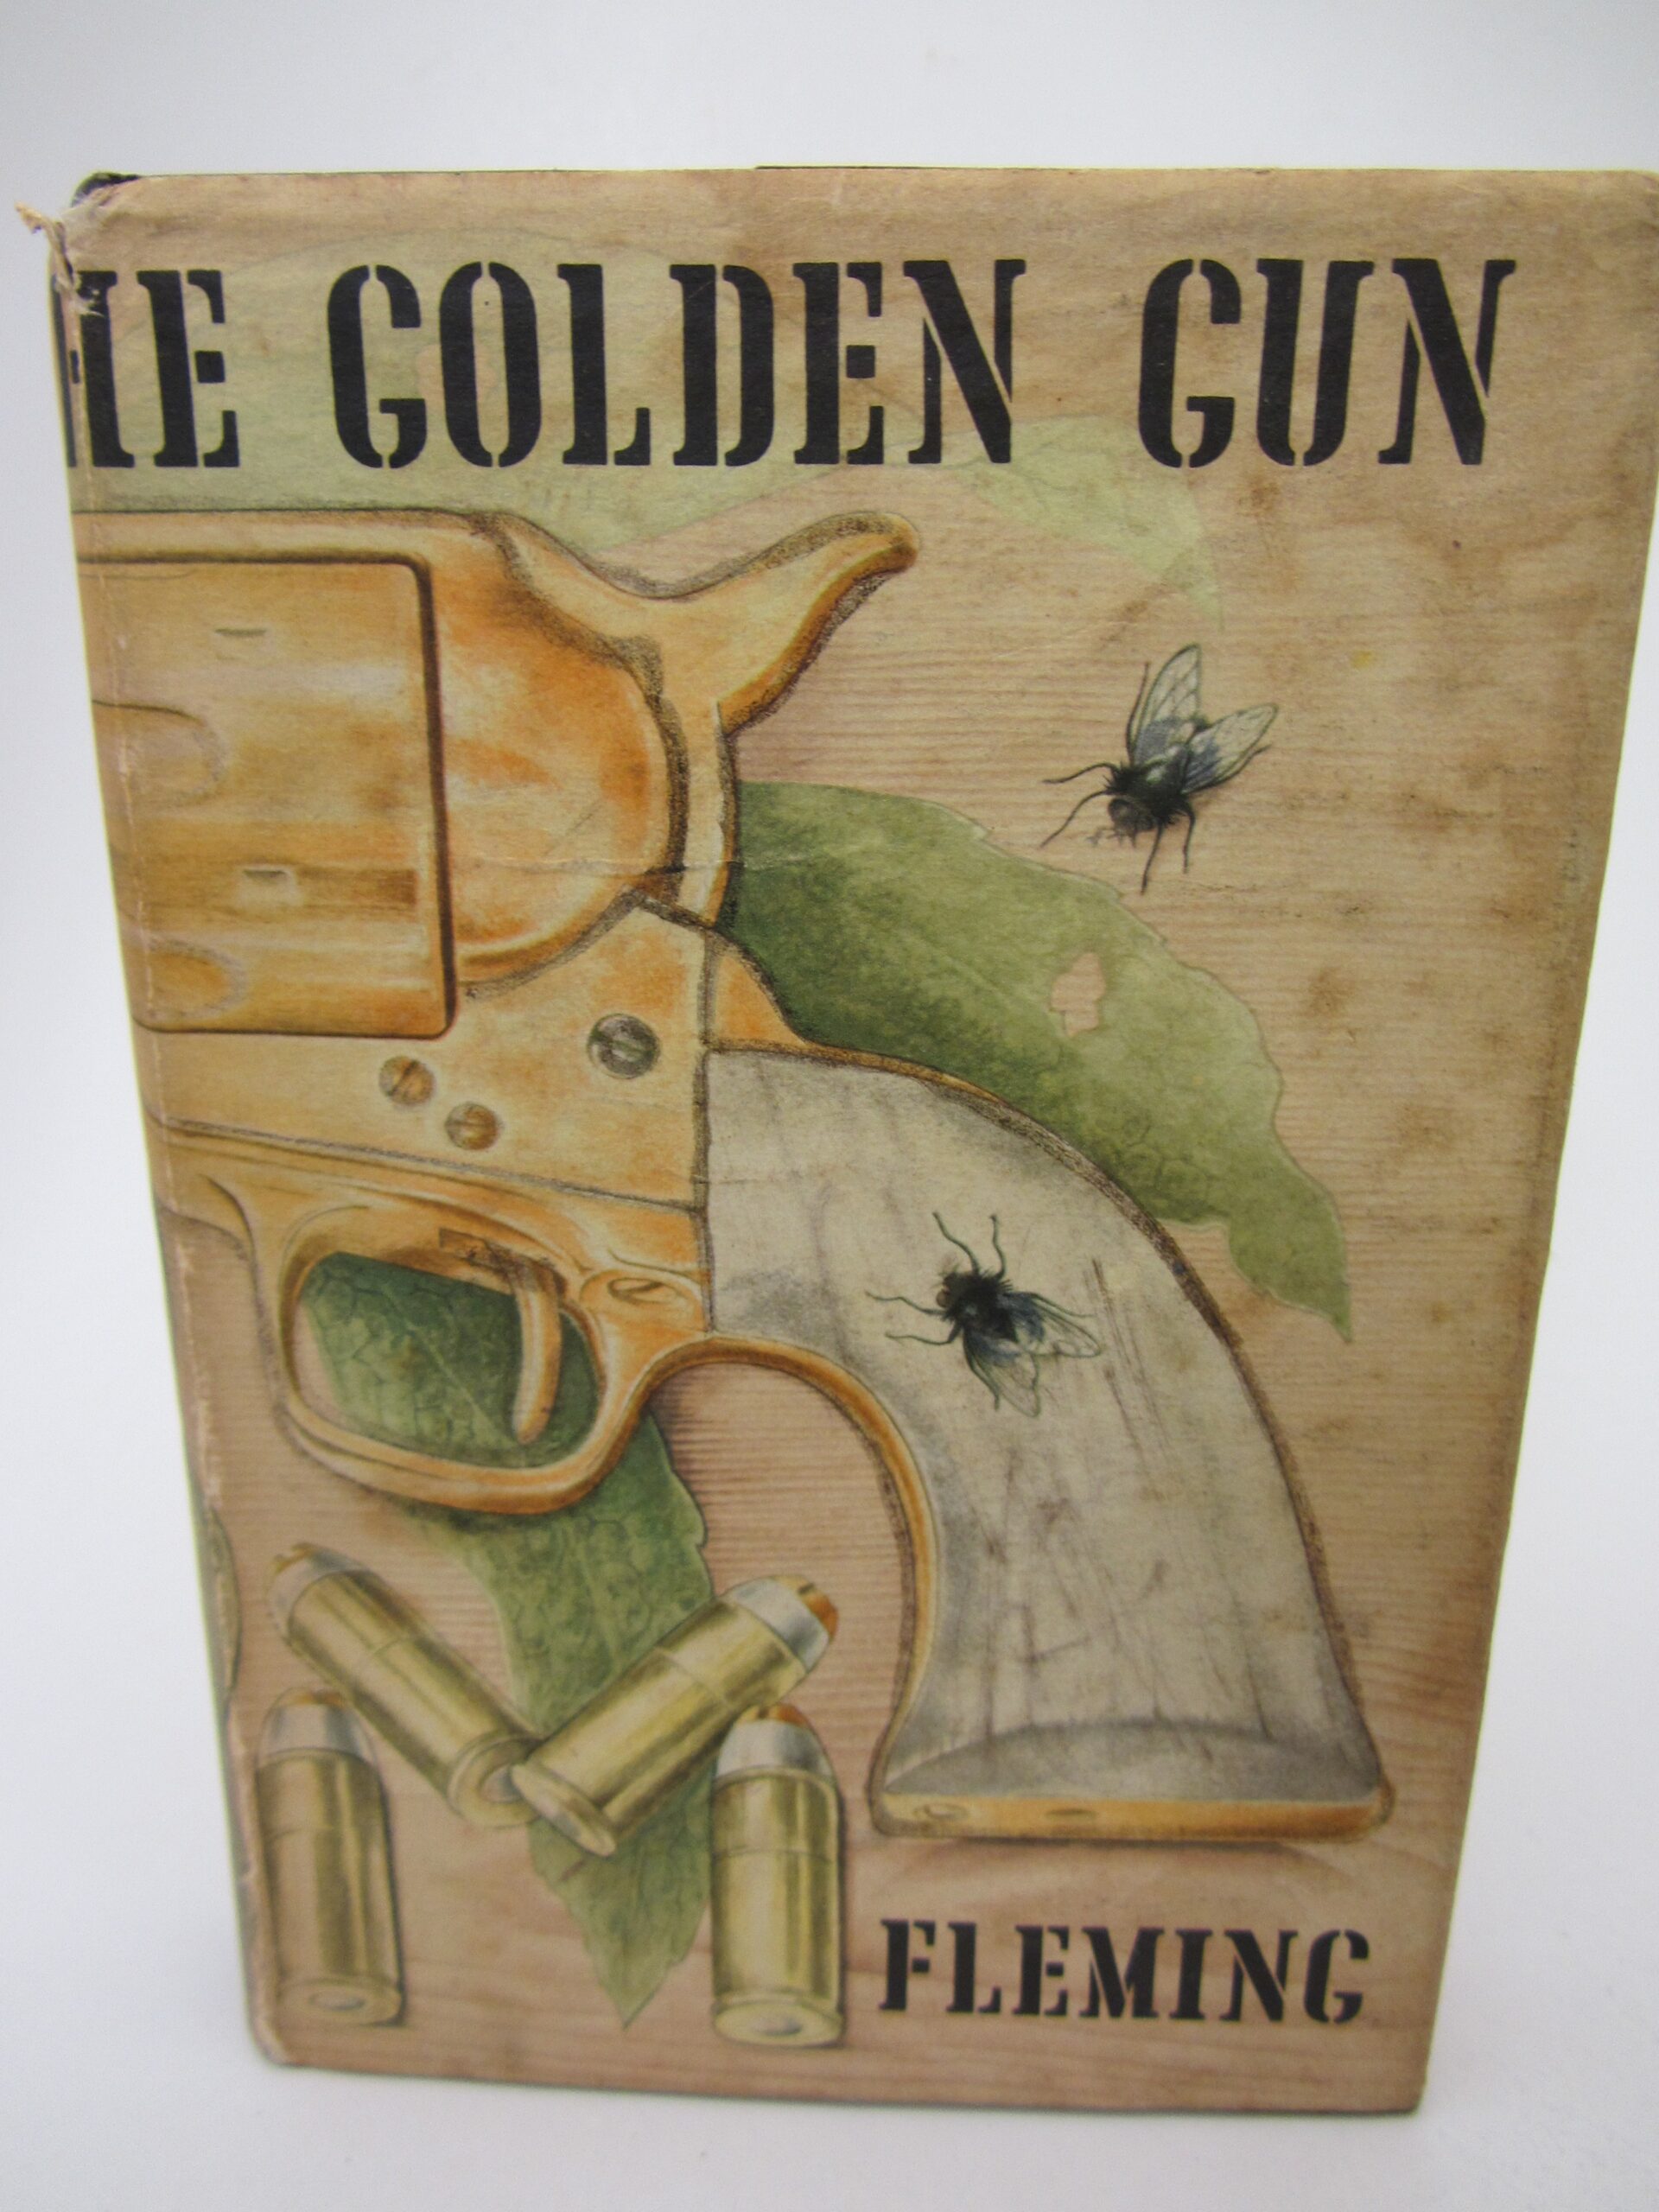 The Man with the Golden Gun. Second Issue (1965) - Ulysses Rare Books